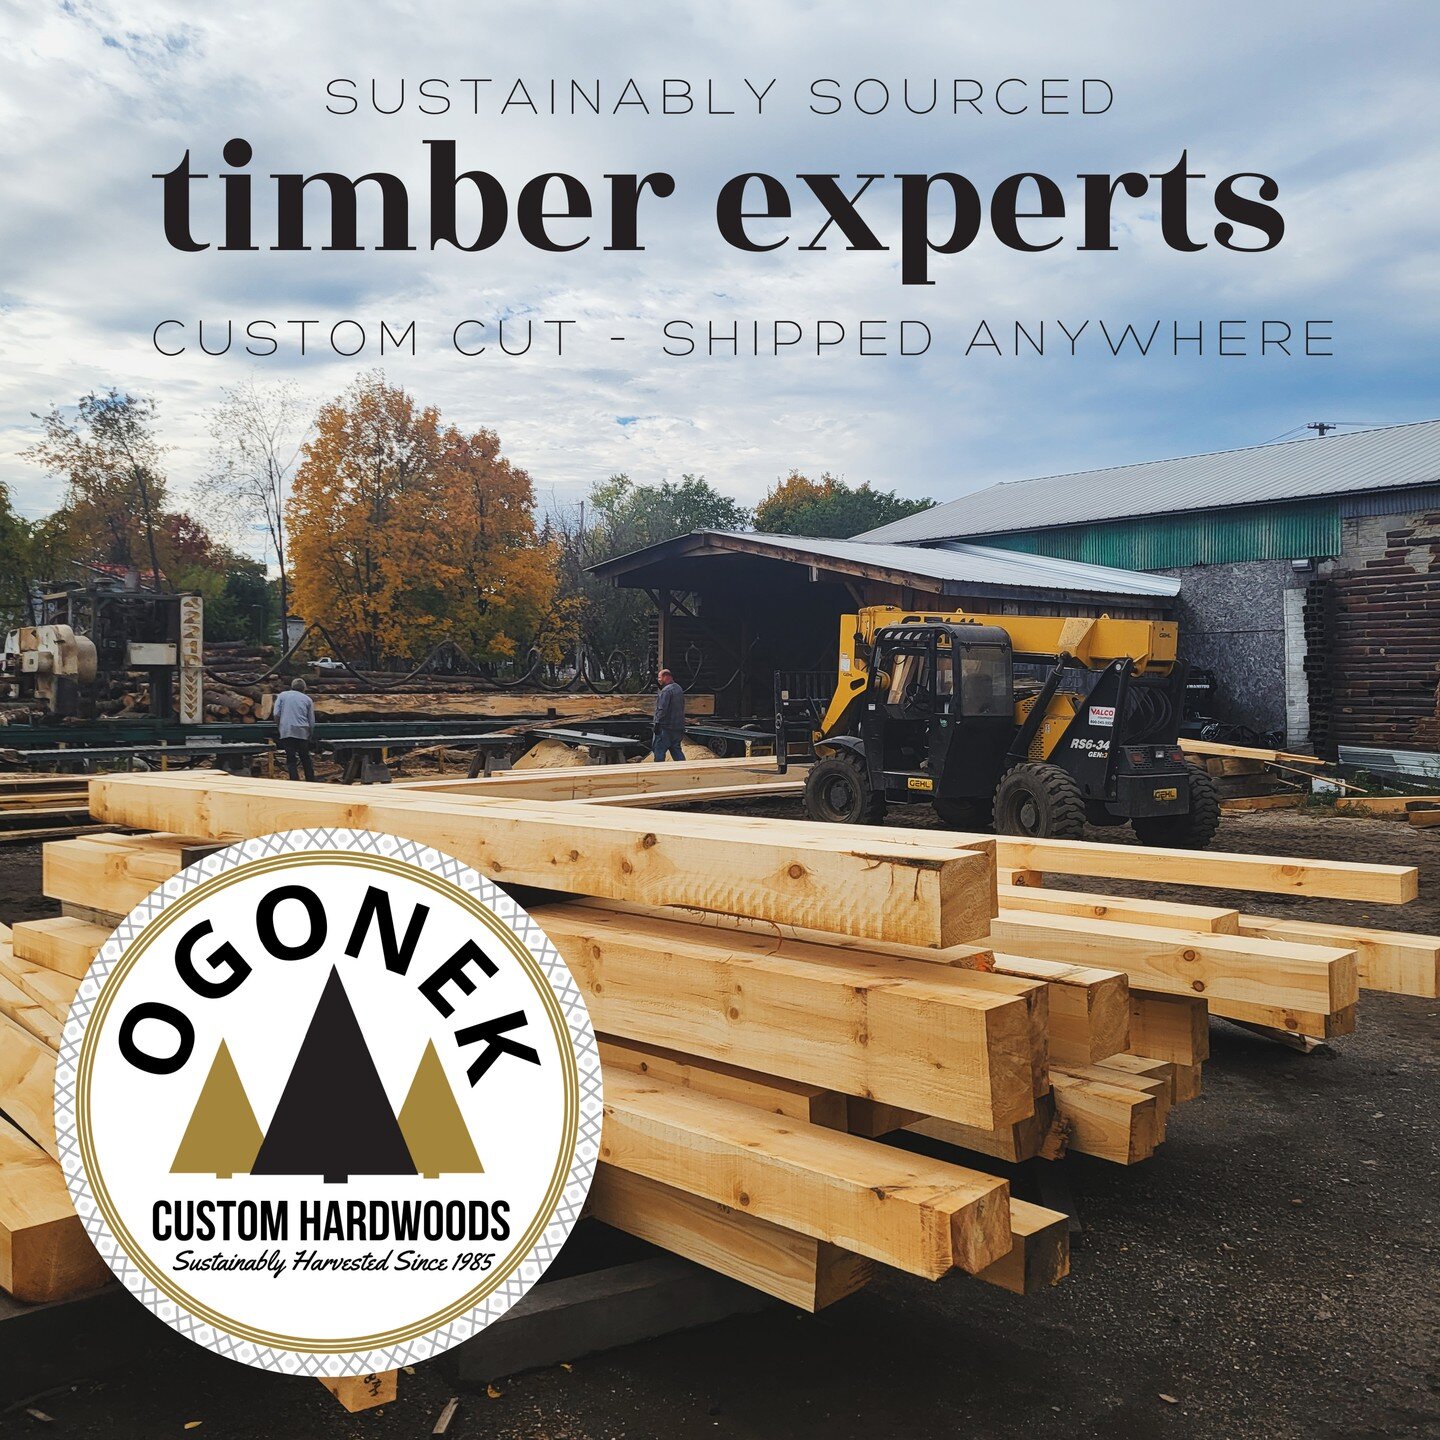 We are a sawmill with special expertise in custom cutting beams and timbers for your timber frame or other home improvement project including decorative beams and mantels. We can cut lengths up to 52 feet long in a variety of species native to Northe